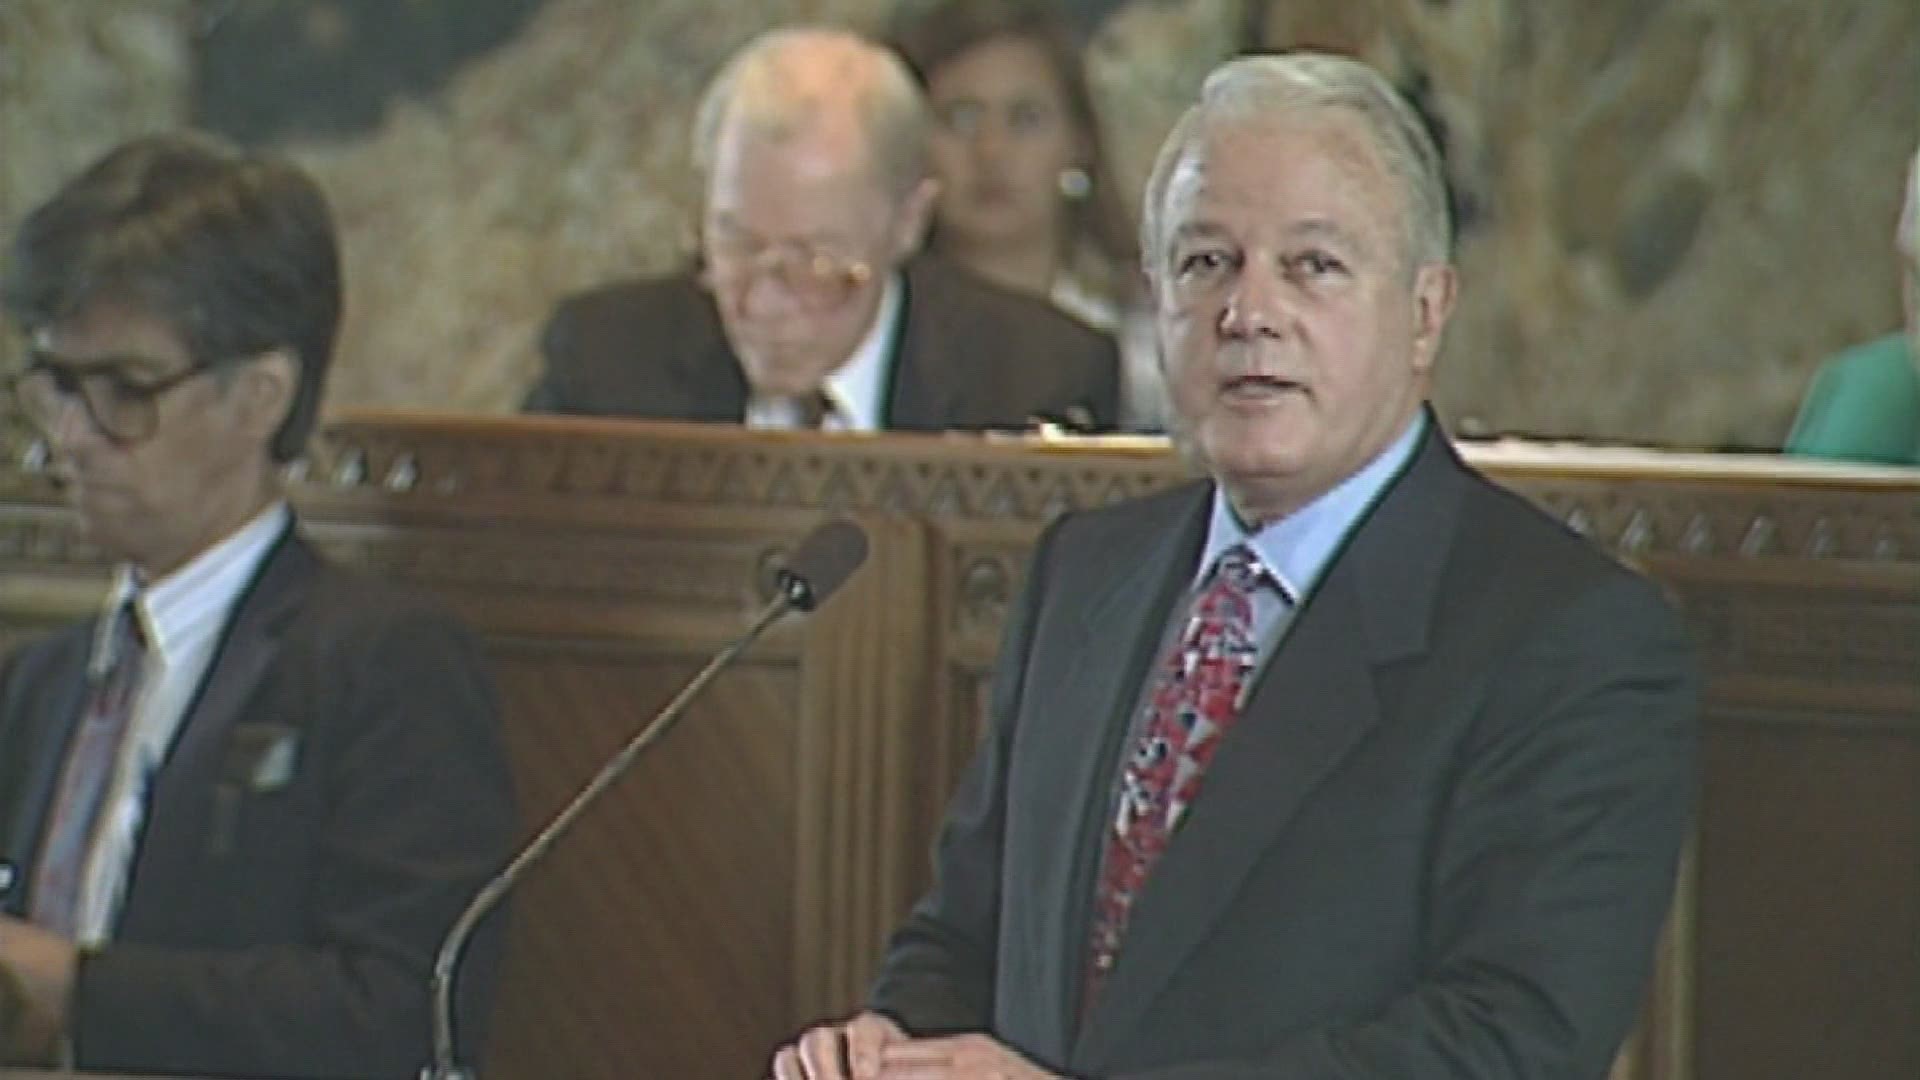 Edwin Edwards was remembered by former colleagues and those who covered him.